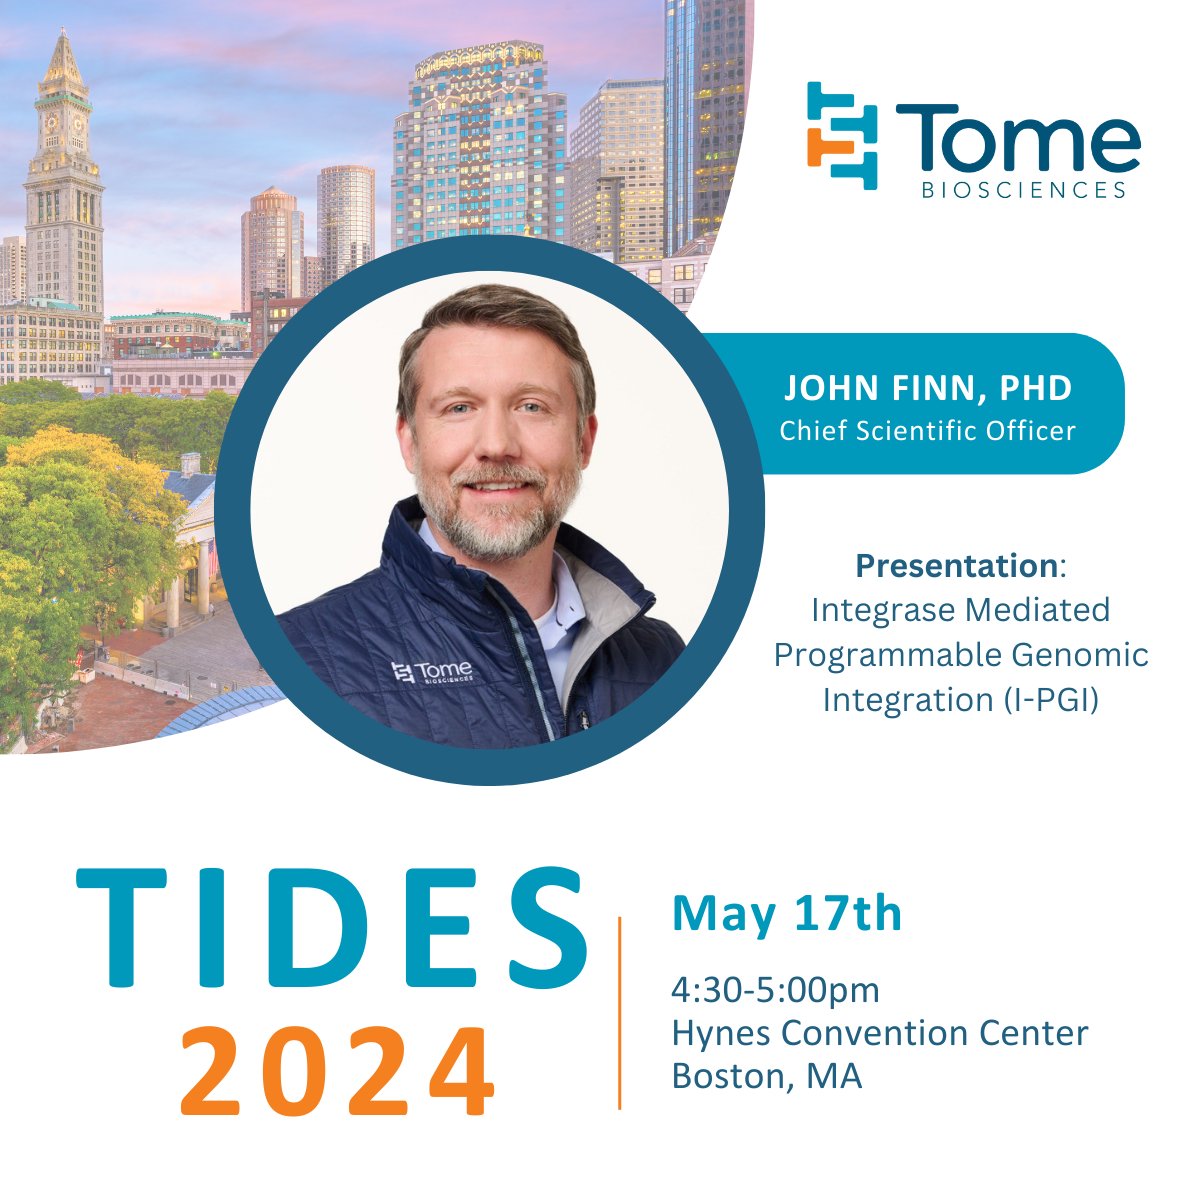 Tome’s CSO, John Finn, PhD, will present at @TIDESInforma on 5/17. He’ll discuss our progress with Integrase-Mediated Programmable Genomic Integration (I-PGI) across integrative gene and cell tx applications. bit.ly/3xYZ5K2